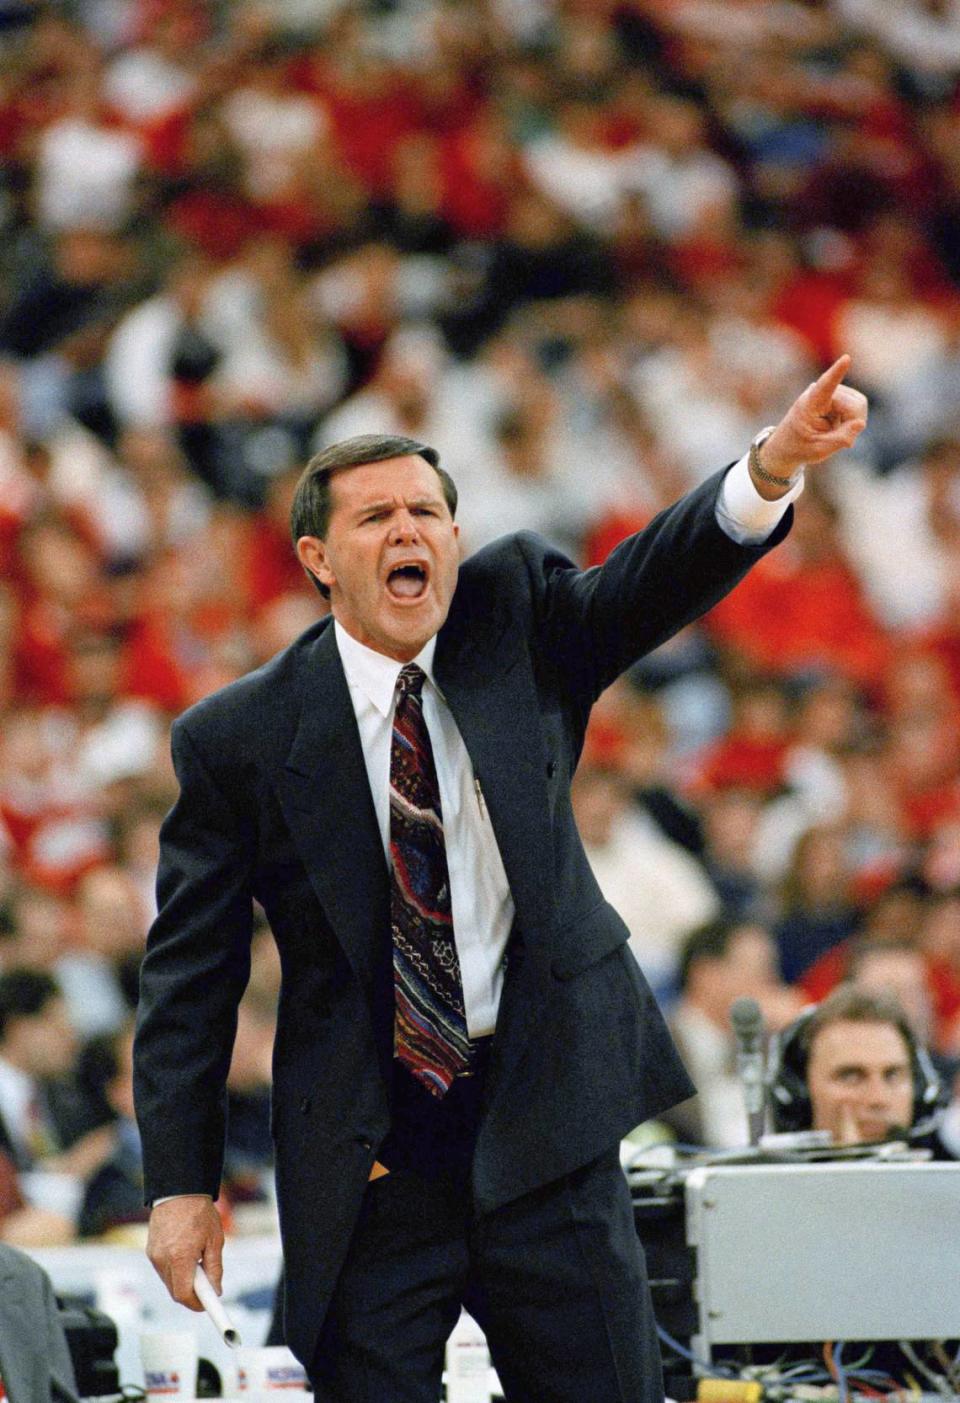 Denny Crum won 675 career games during 30 seasons at U of L and is in the Naismith Memorial Basketball Hall of Fame.